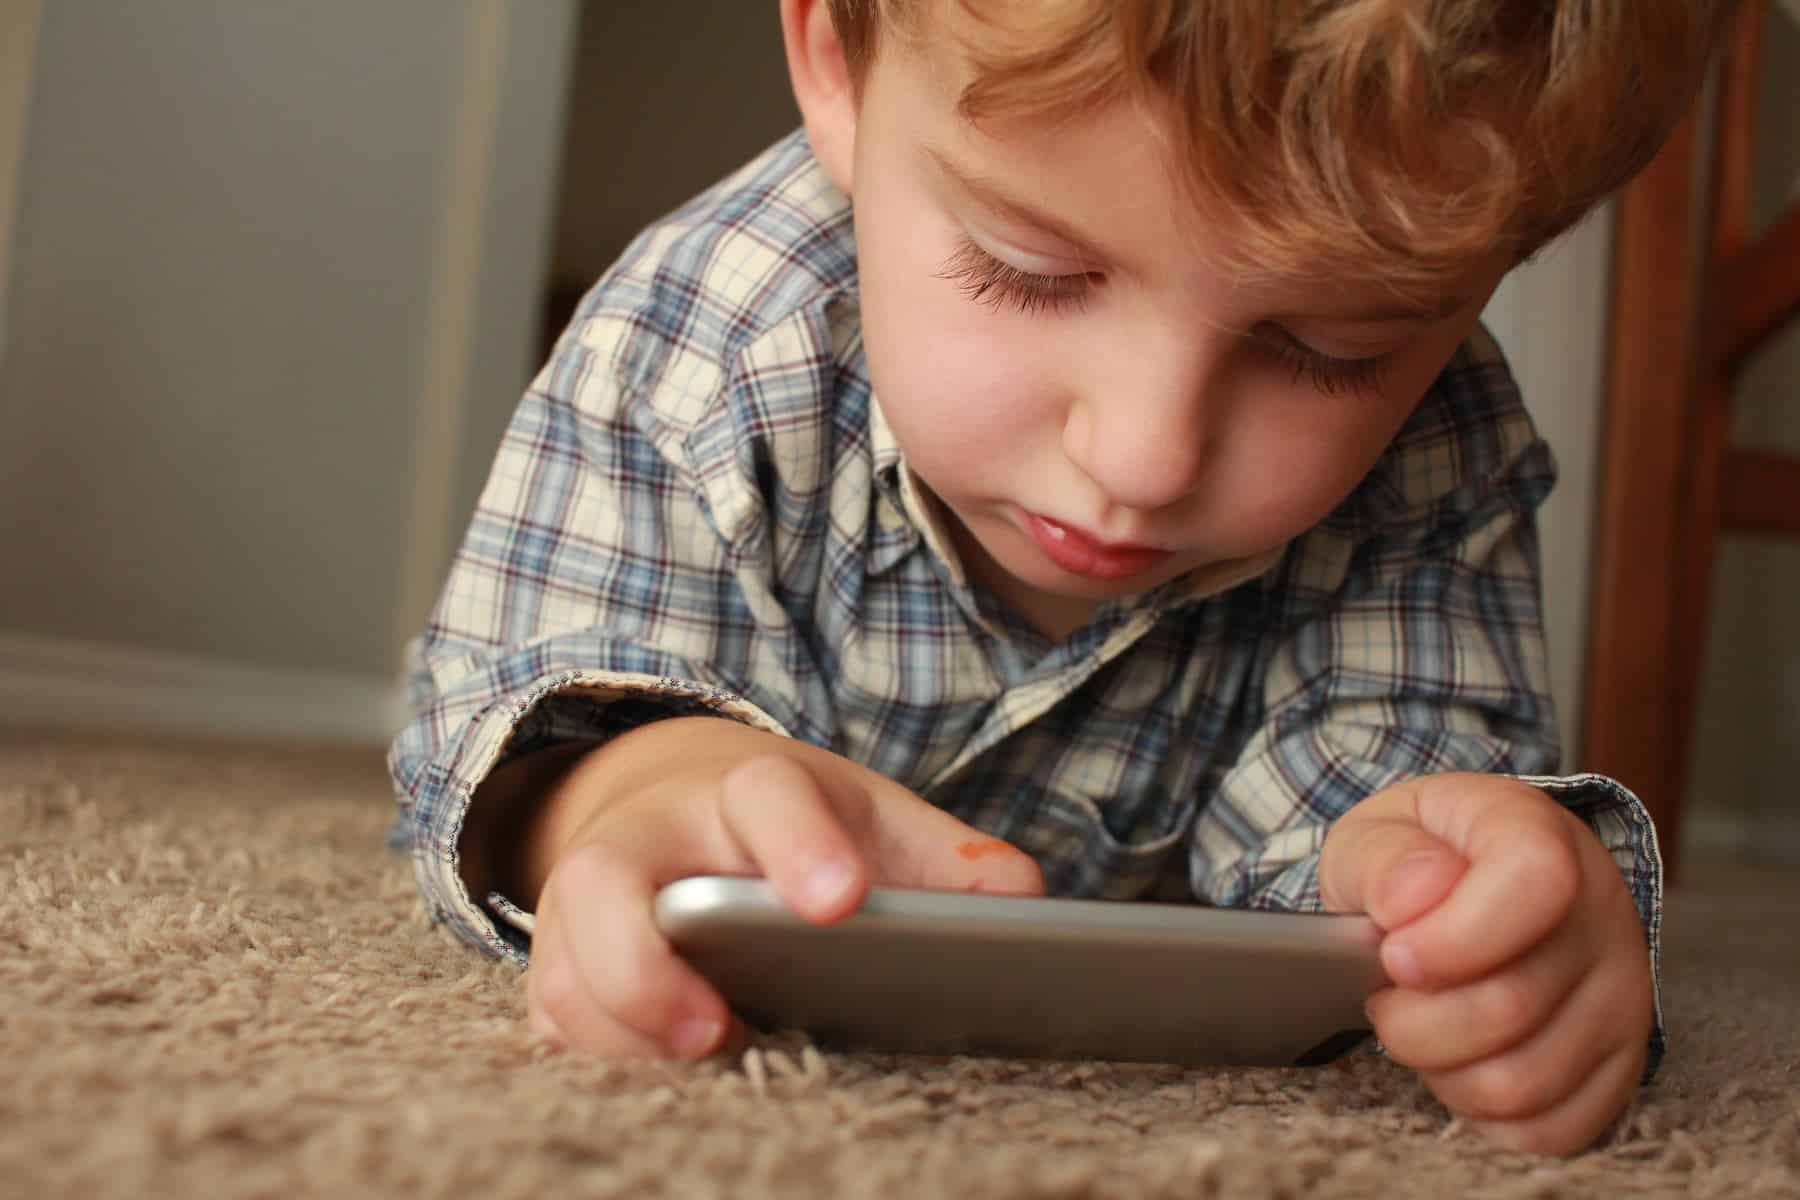 Daily Mom Parent Portal 7 Benefits Of Exposing Young Children To Modern Technology 1